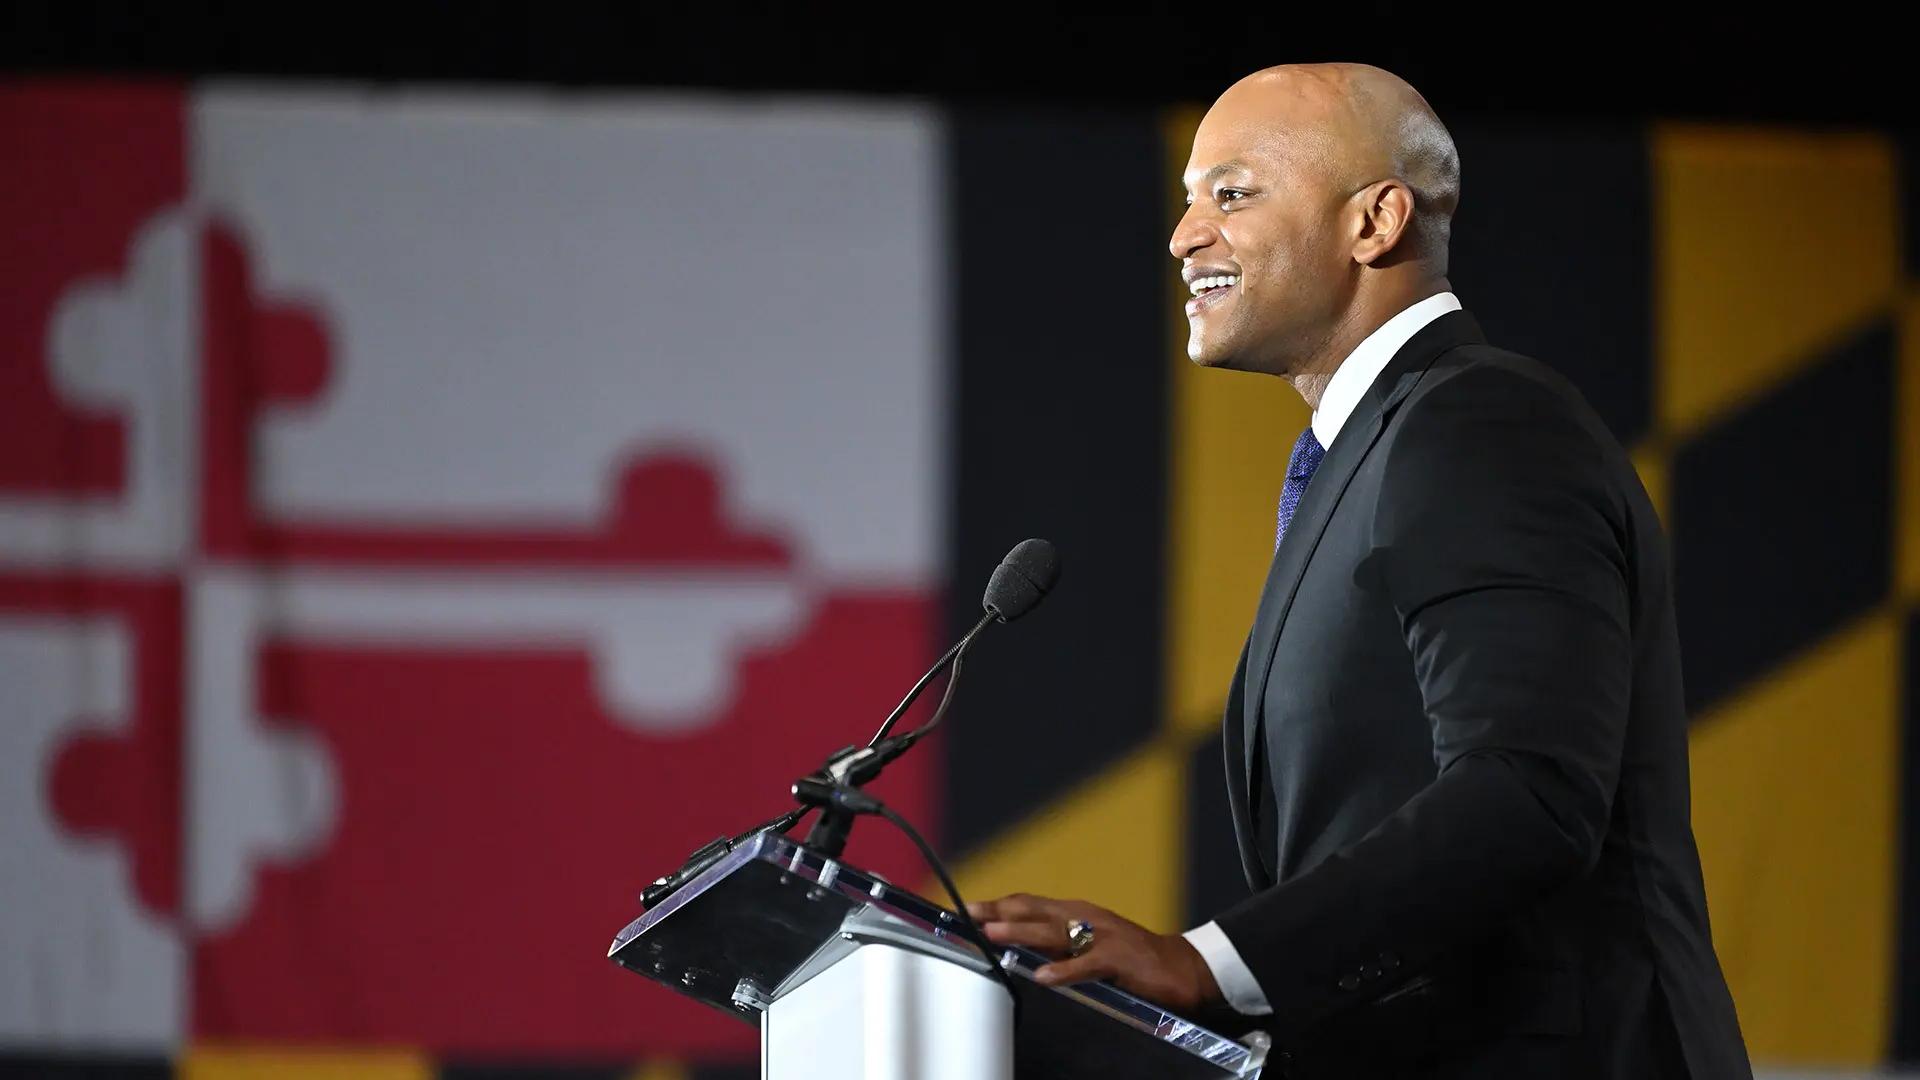 Gov. Wes Moore is an Army combat veteran, founded a company to support underserved students in college, and has written several books, including the bestseller “The Other Wes Moore." Photo courtesy of the Office of Gov. Wes Moore.